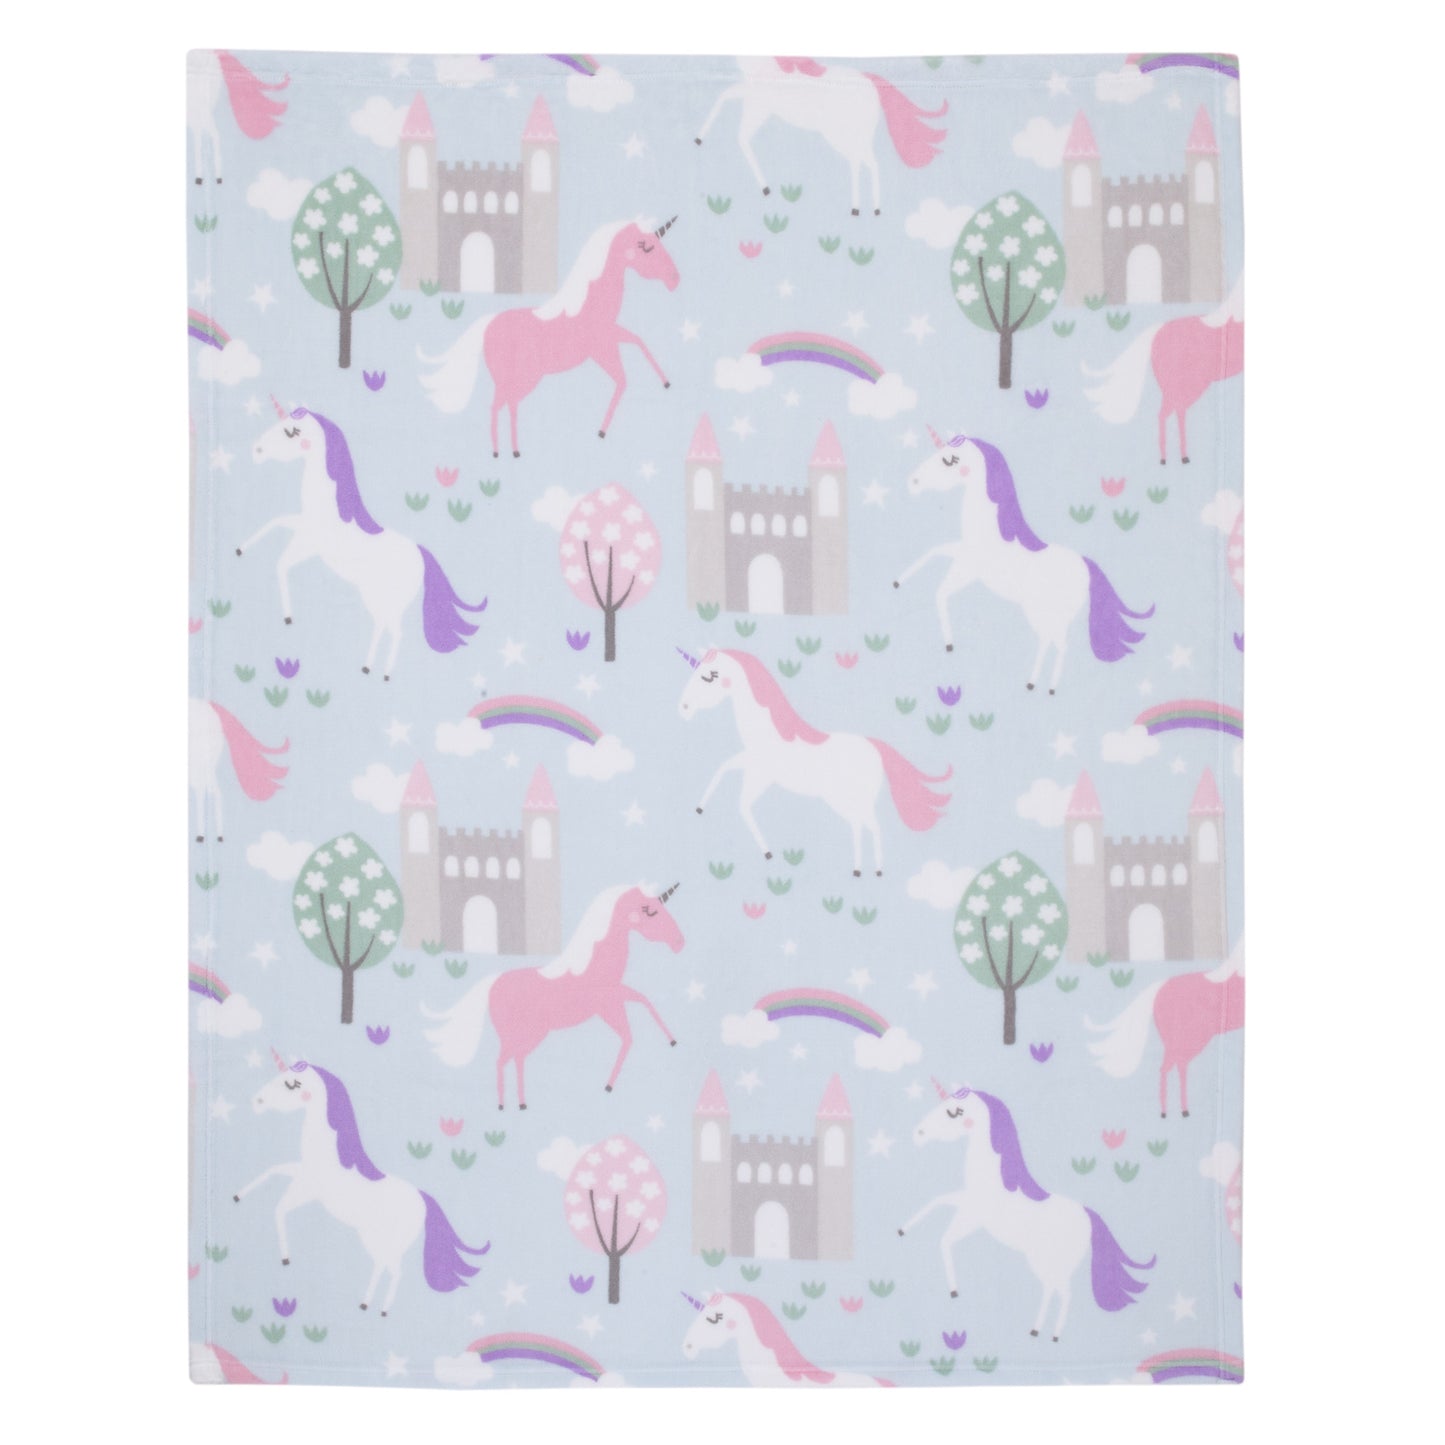 Everything Kids Unicorn Aqua, Pink and White Castles and Rainbows Super Soft Toddler Blanket